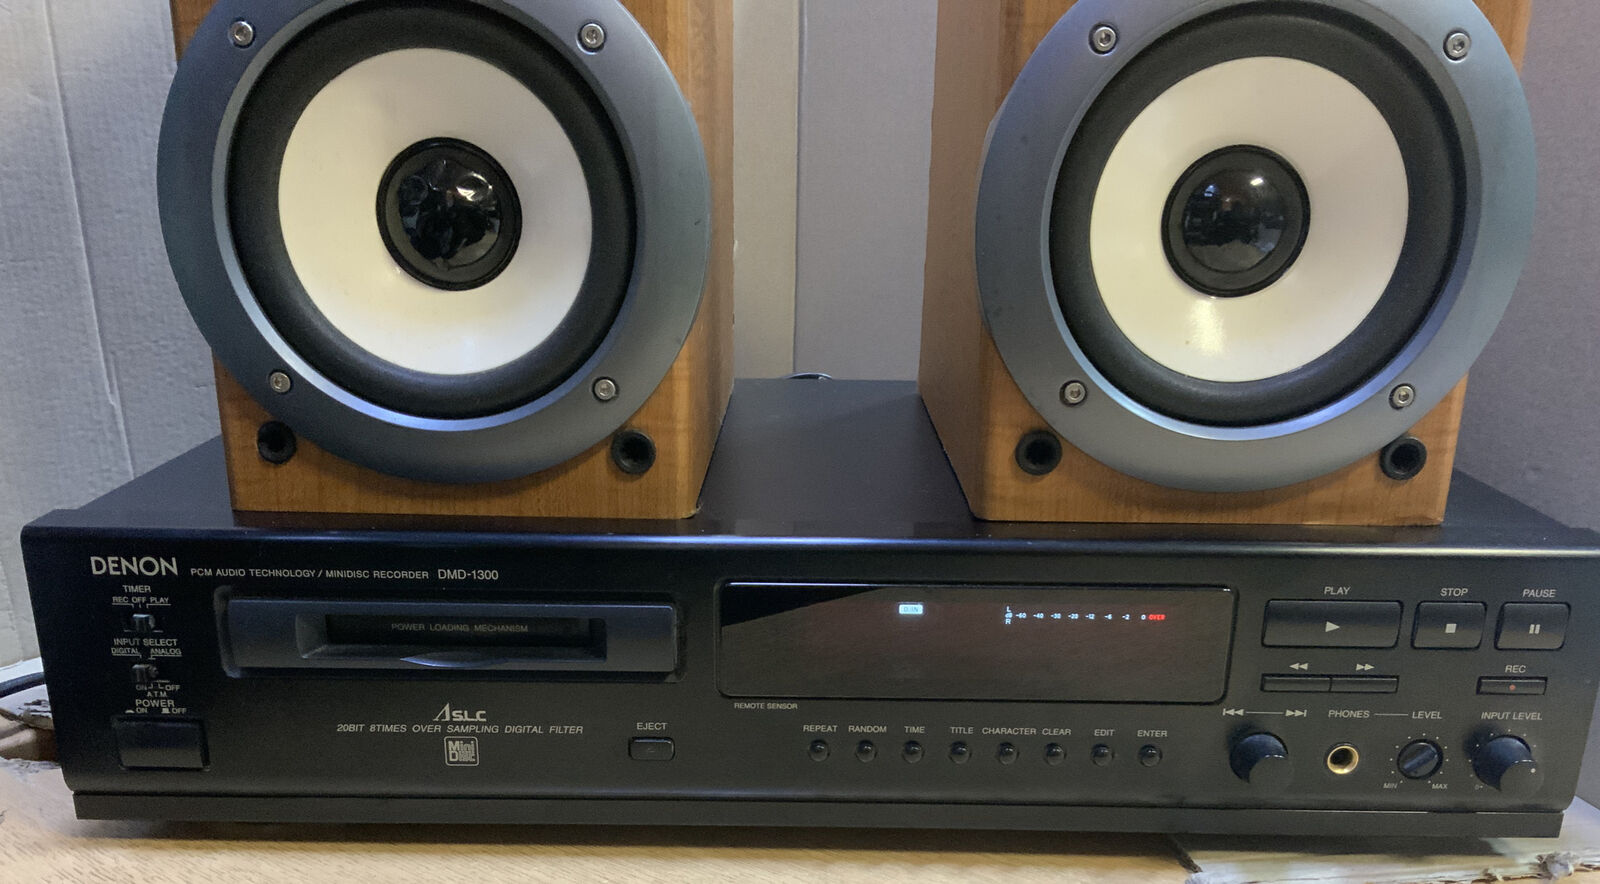 DENON DMD-1300 MINIDISK RECORDER / PLAYER,PCM AUDIO TECHNOLOGY With 2  Speakers